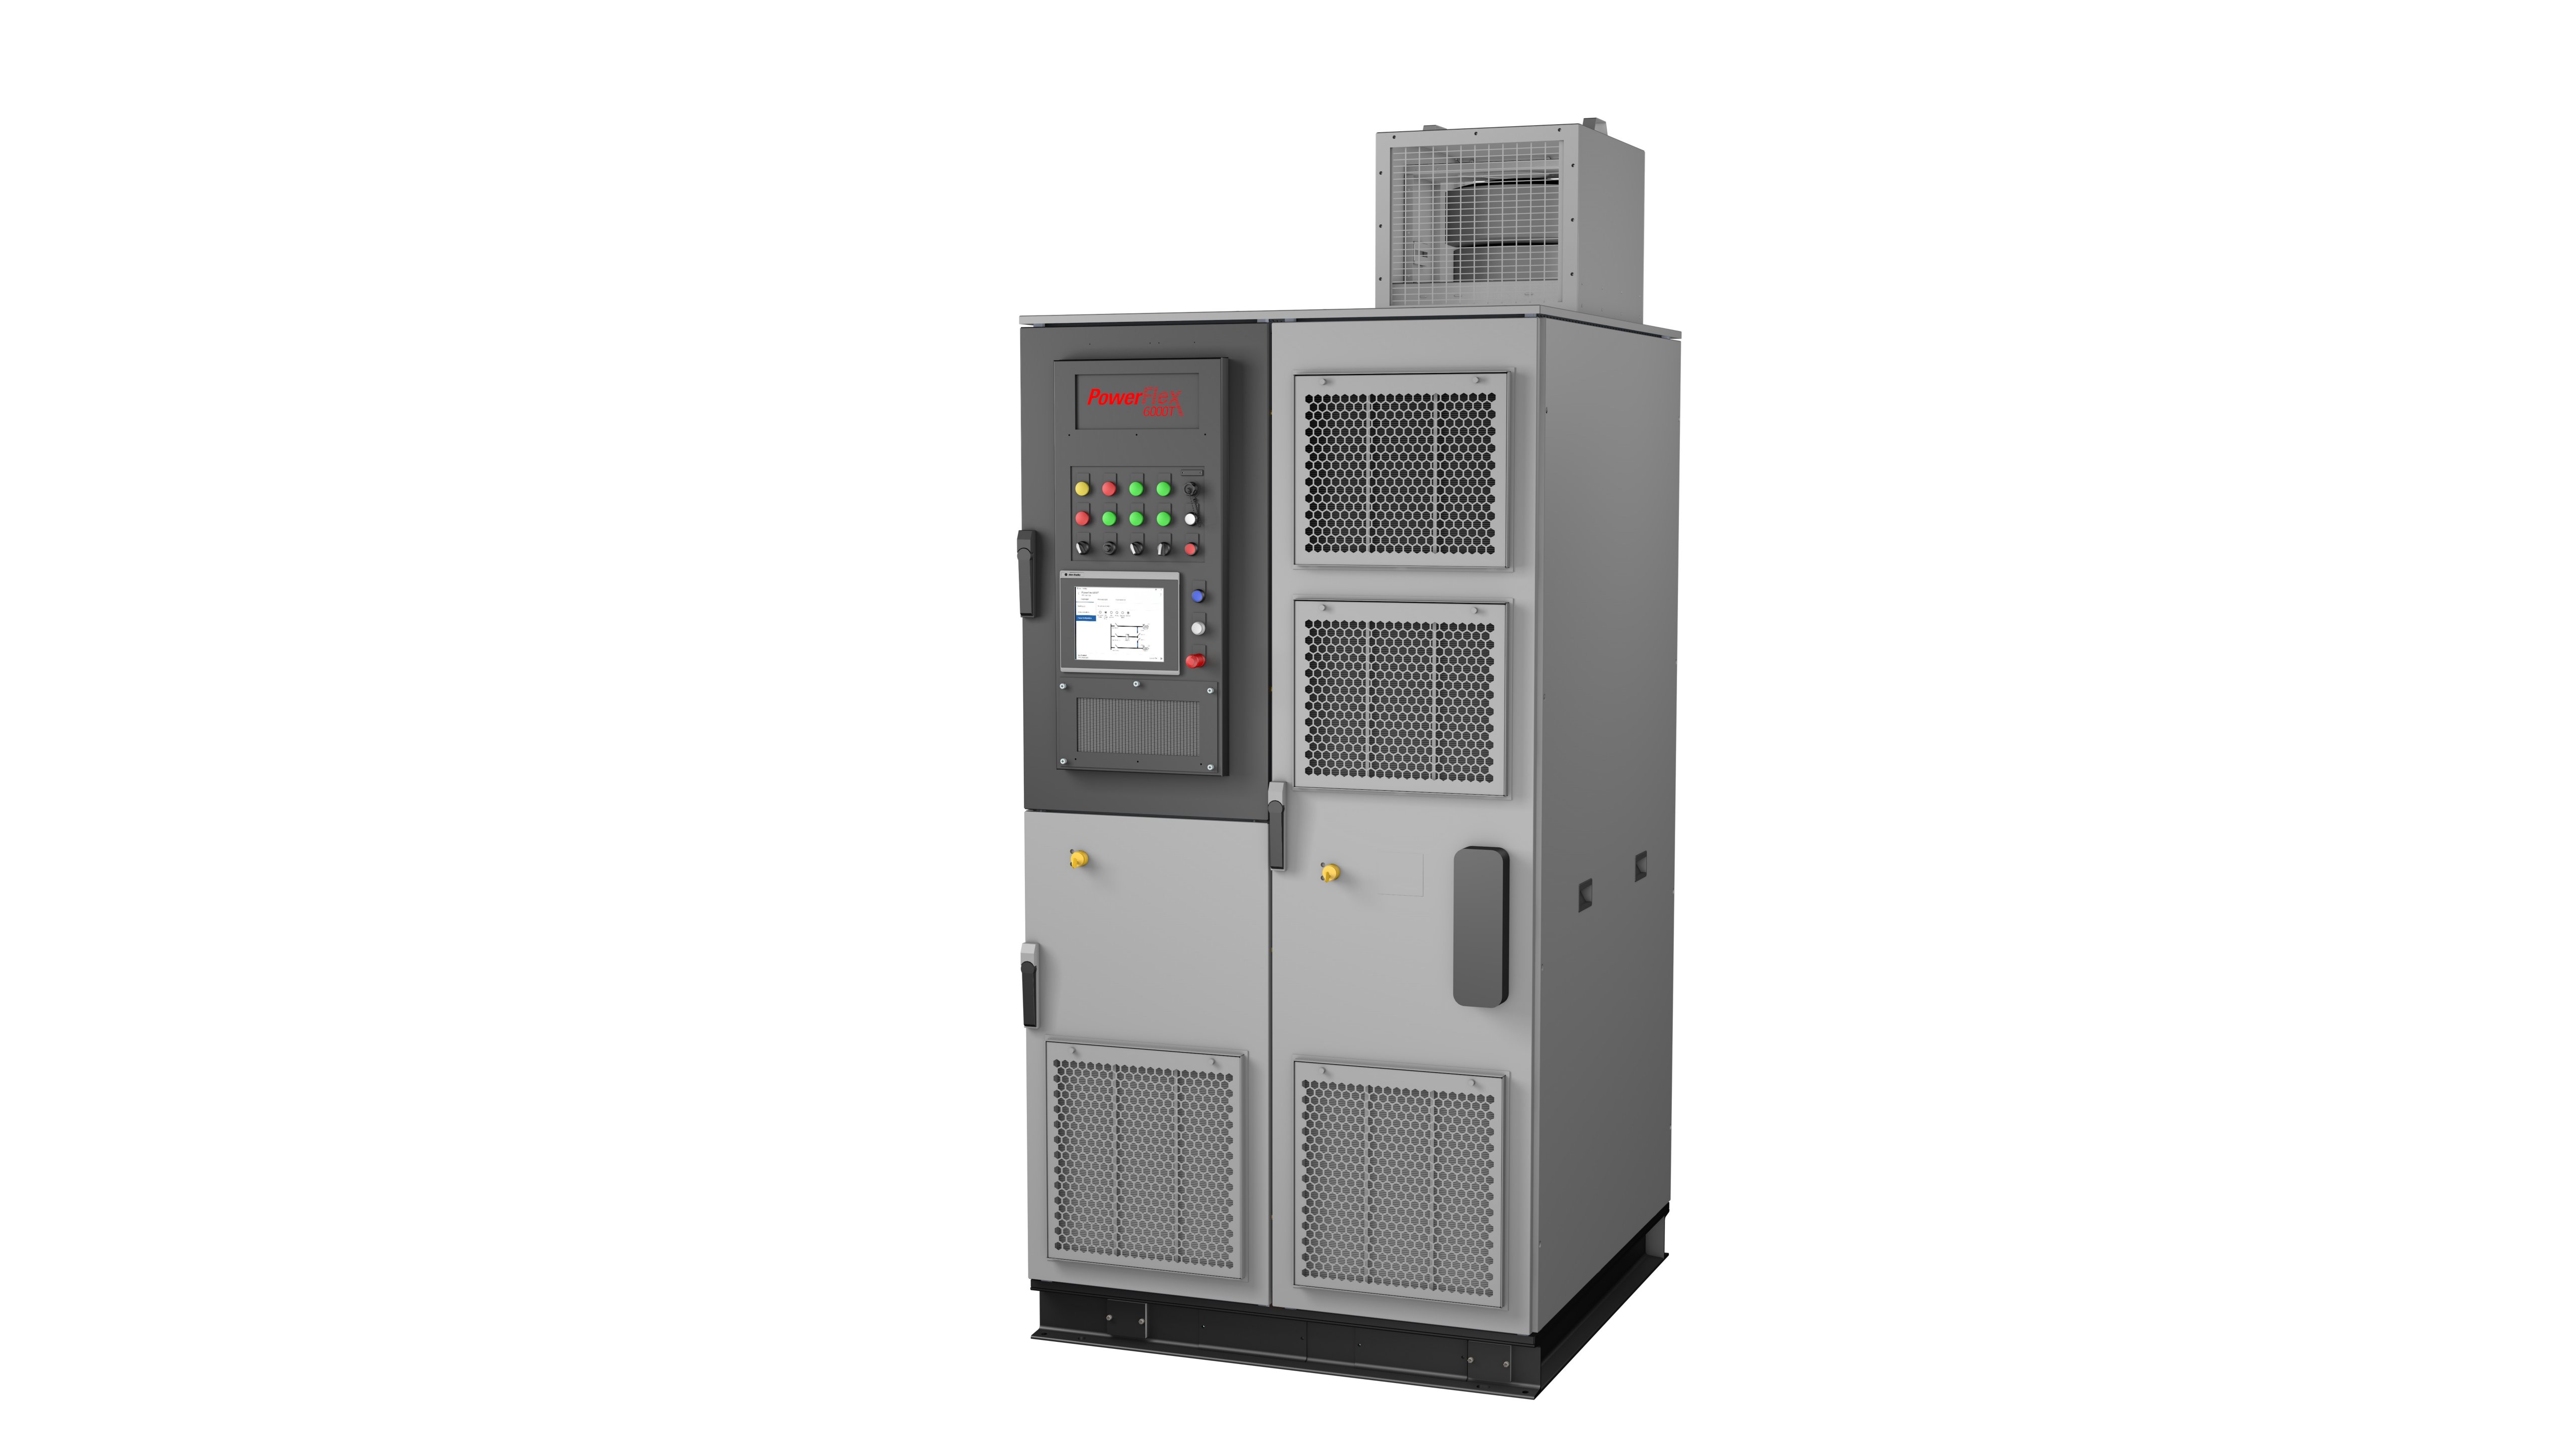 Two tall, gray side-by-side metal cabinets comprise the PowerFlex 6000T variable frequency drive unit from Rockwell Automation – used to control motors in heavy industrial applications.